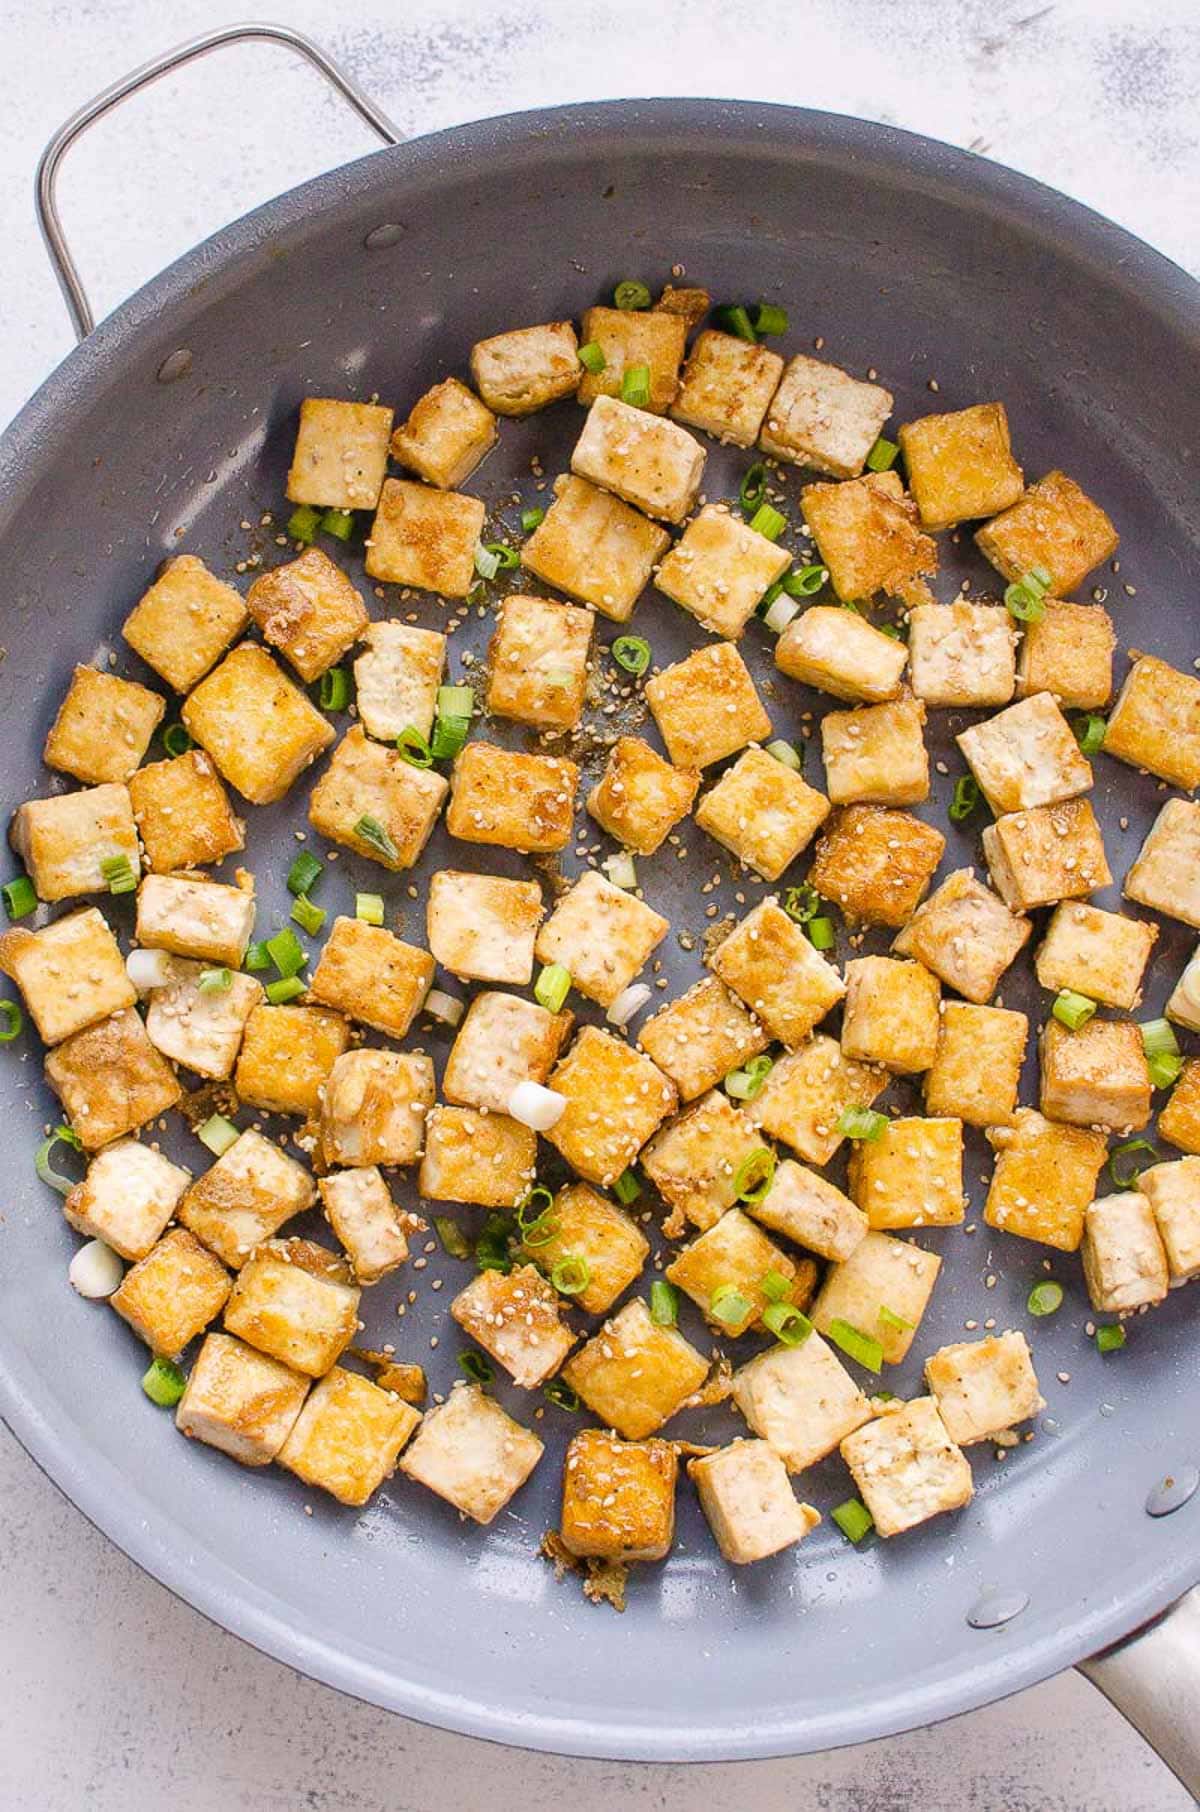 Crispy fried tofu on skillet garnished with green onions and sesame seeds.